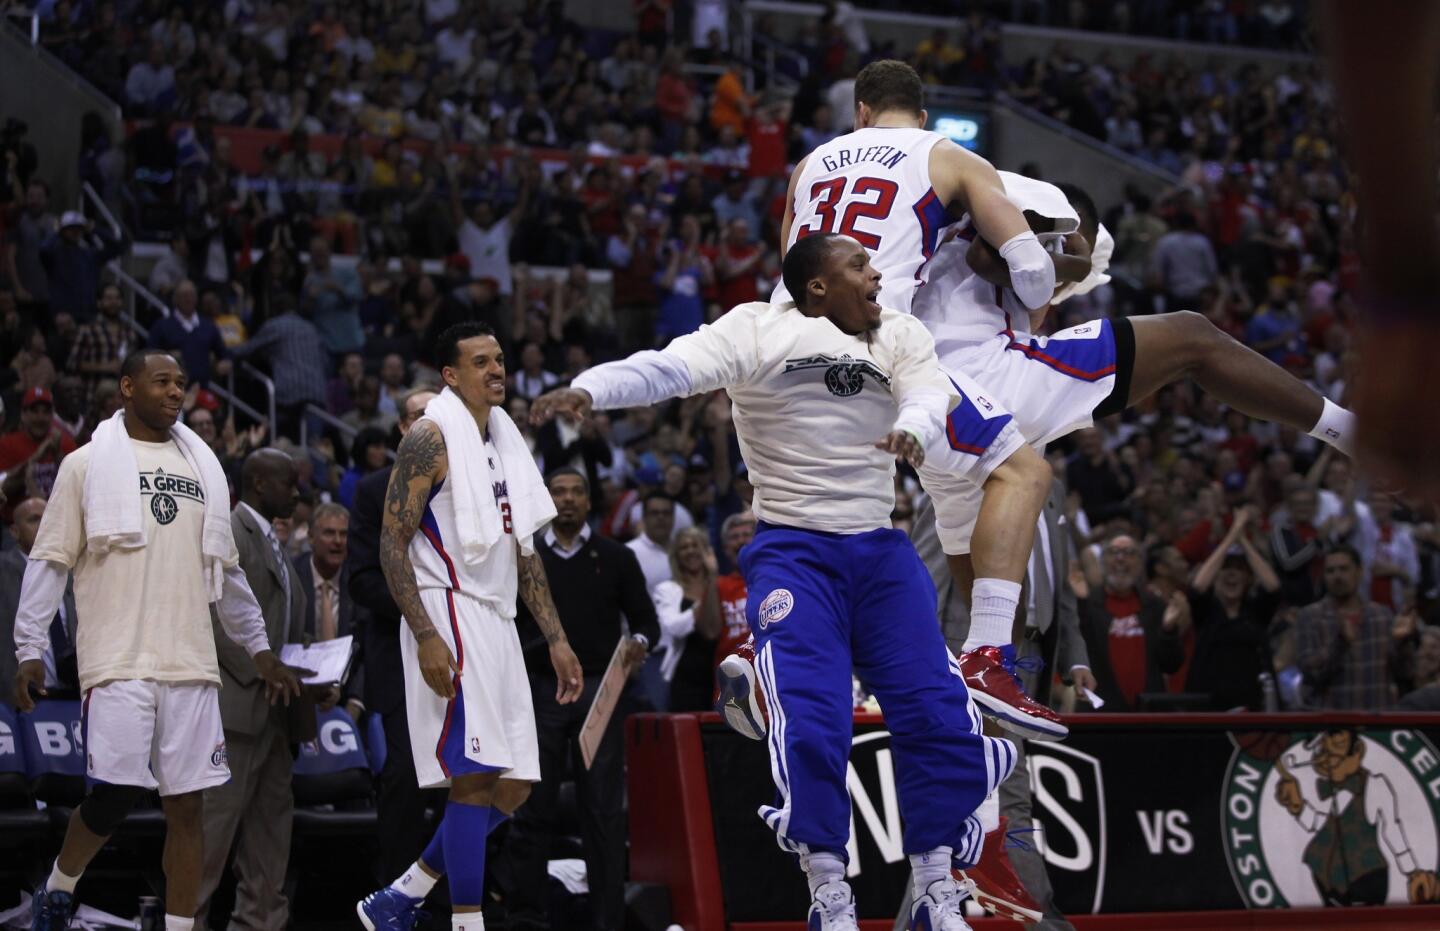 Clippers players celebrate in the final moments of their 109-95 victory over the Lakers on Sunday afternoon at Staples Center.